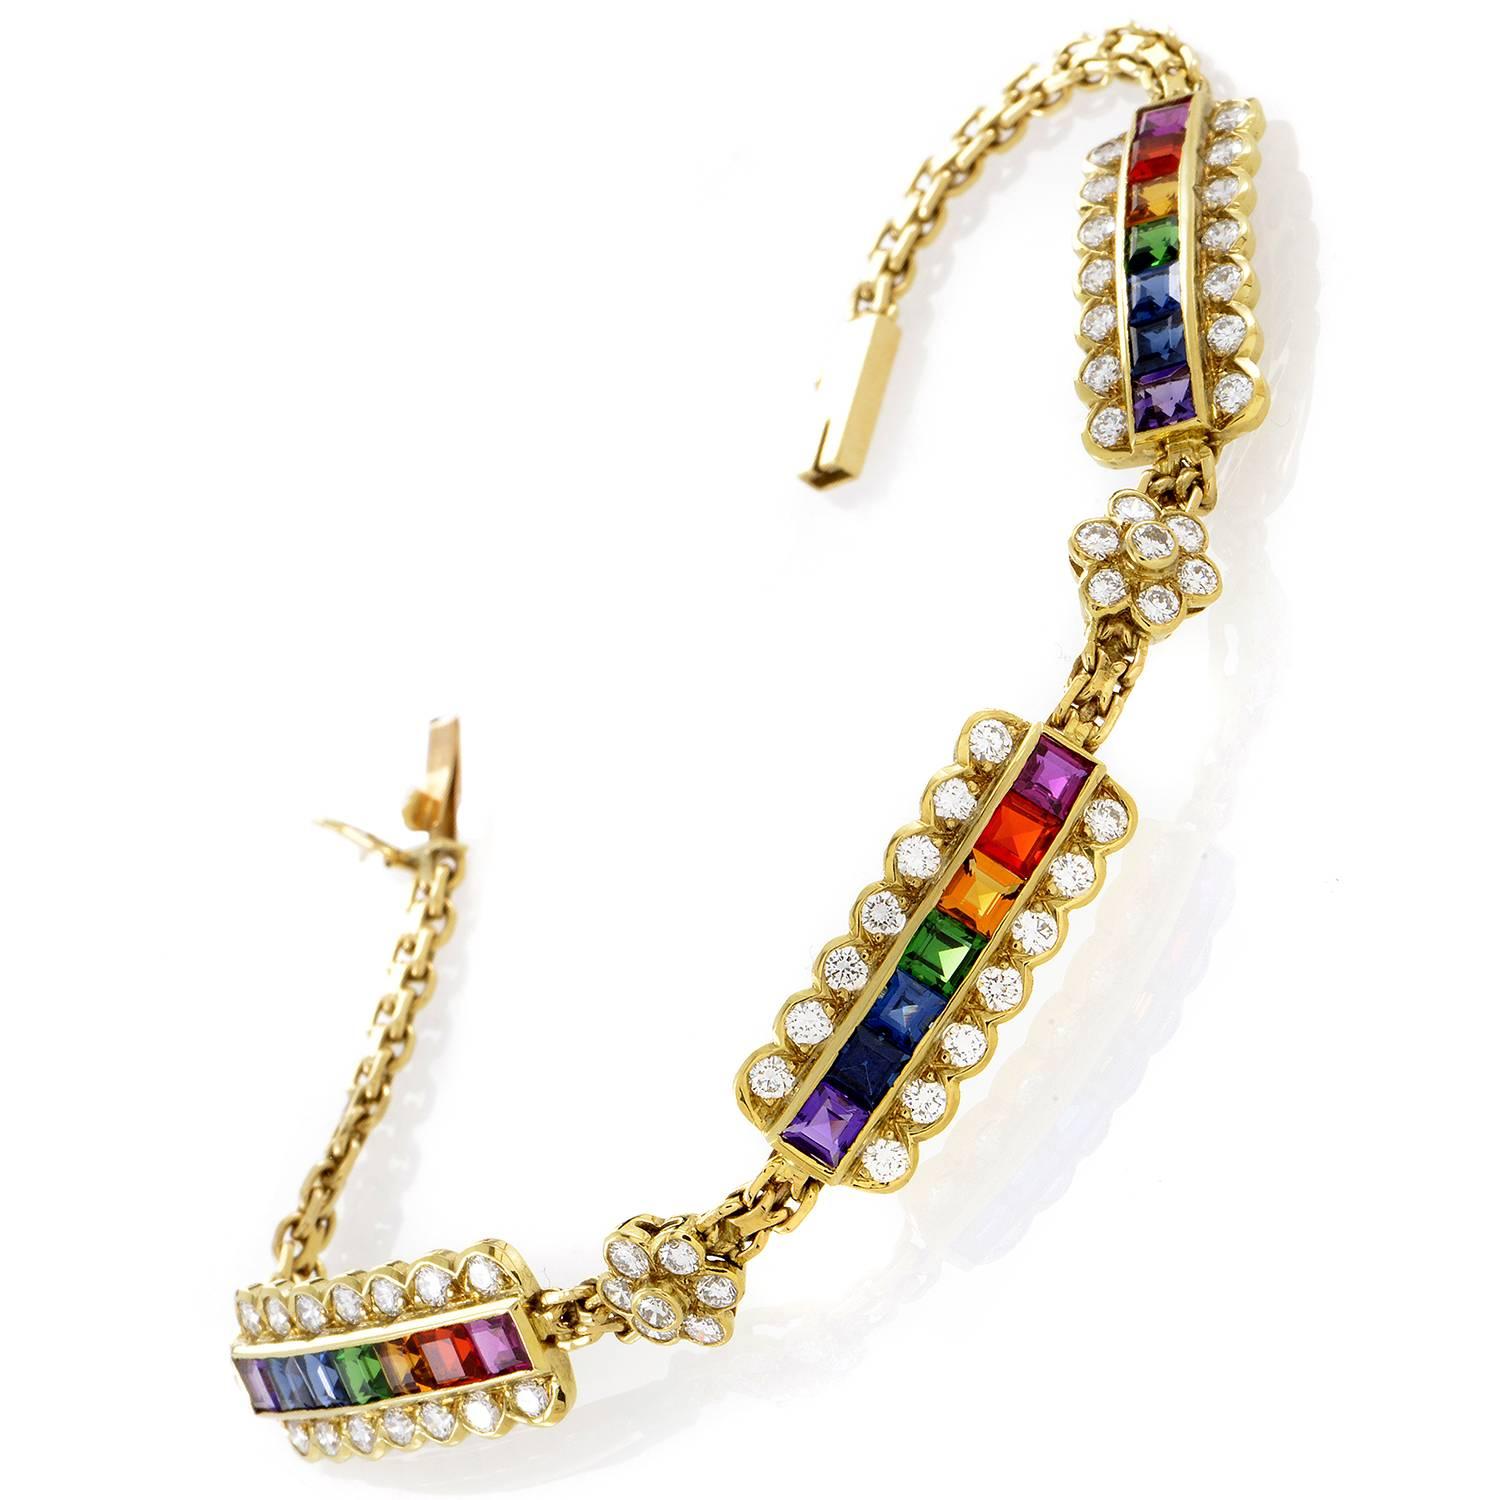 Employing the prestigious exuberance of 18K yellow gold and enchanting effervescence of multi-colored sapphires weighing in total 5.00 carats, this gleeful bracelet from Asprey is also adorned with the brilliant sparkle of diamonds totaling 2.50